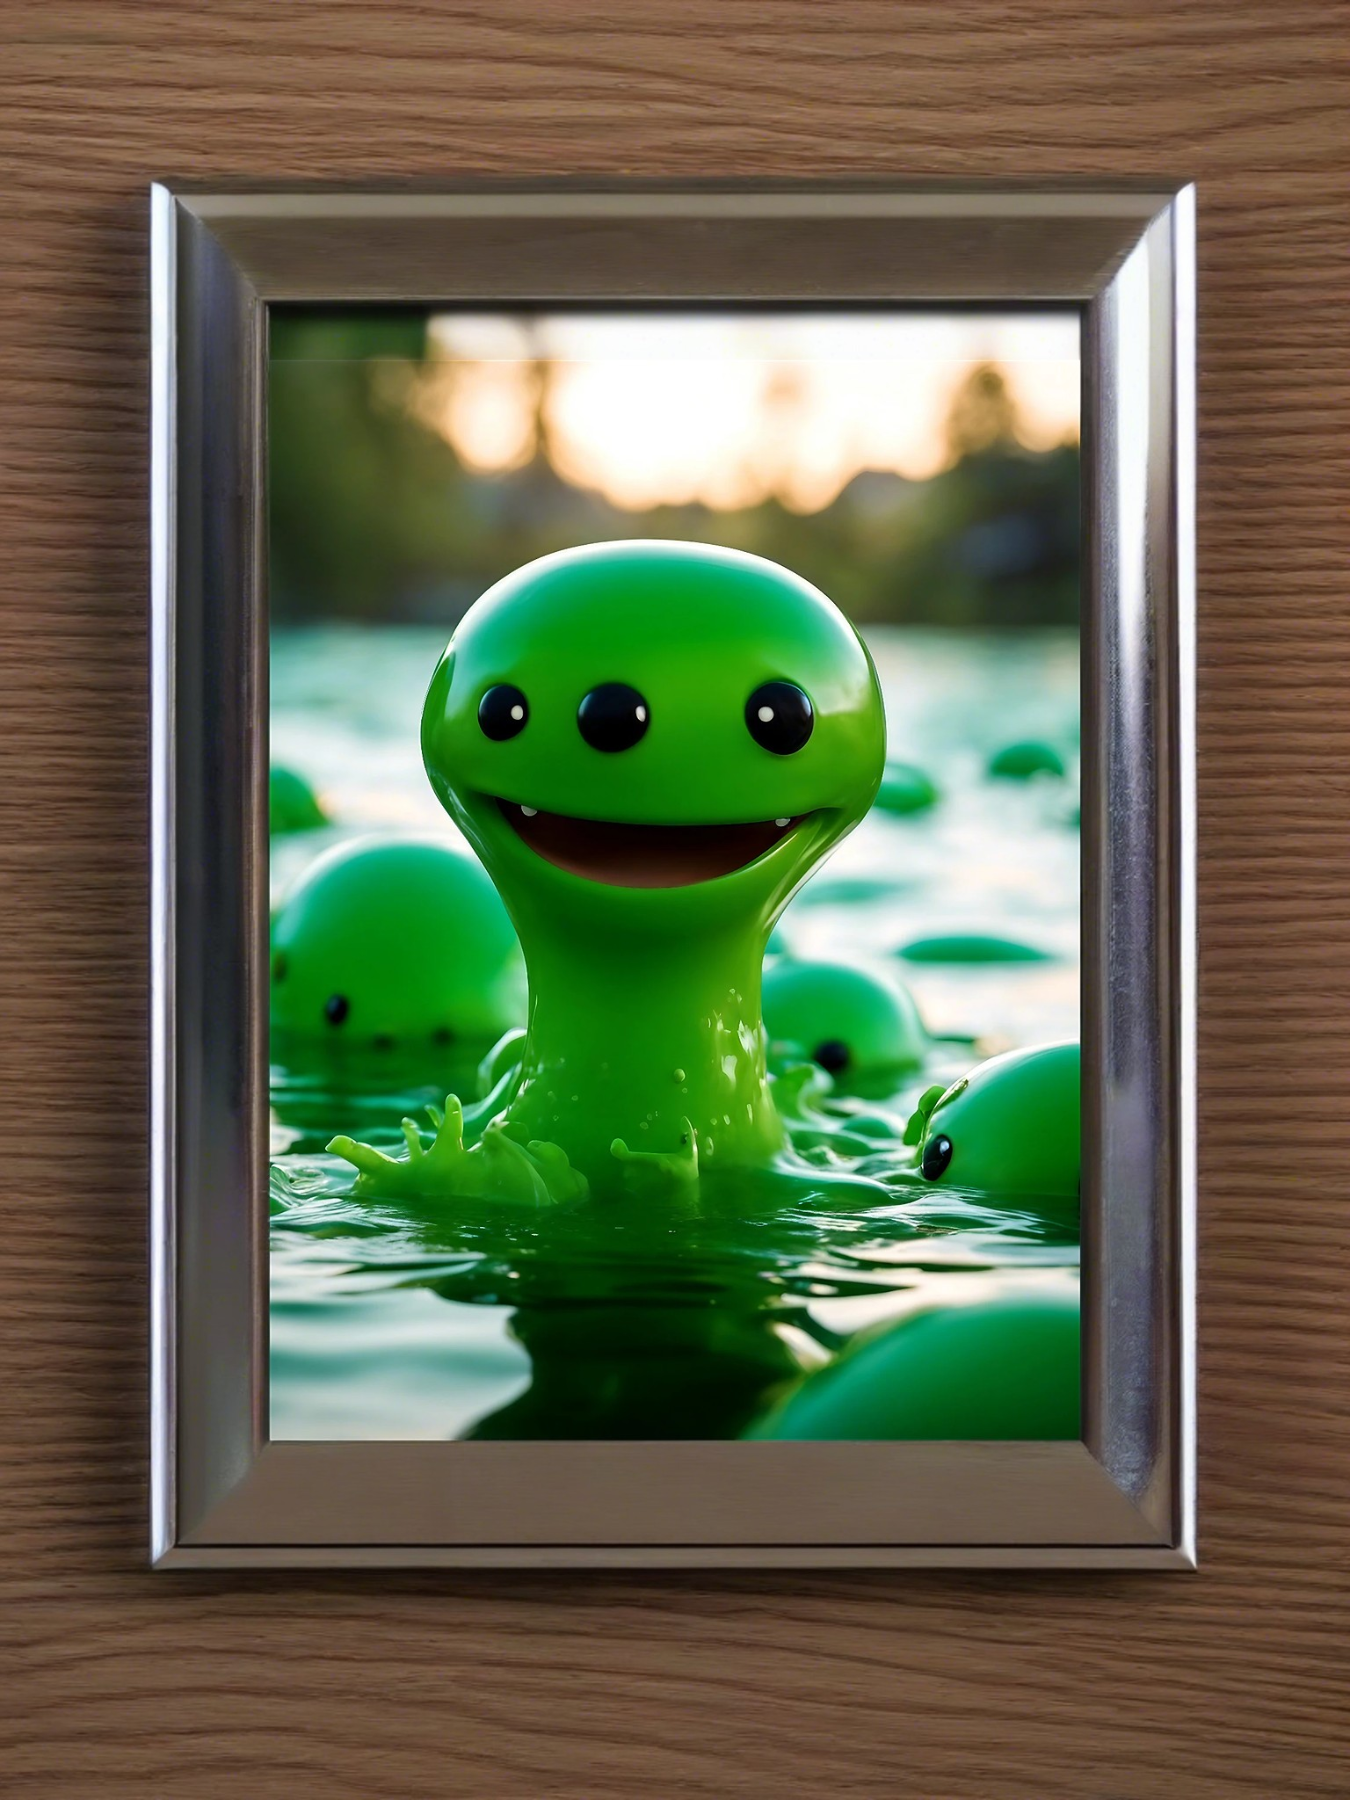 Cute green slime monsters in the lake - fantasy mini photo poster - 27x20 cm 5